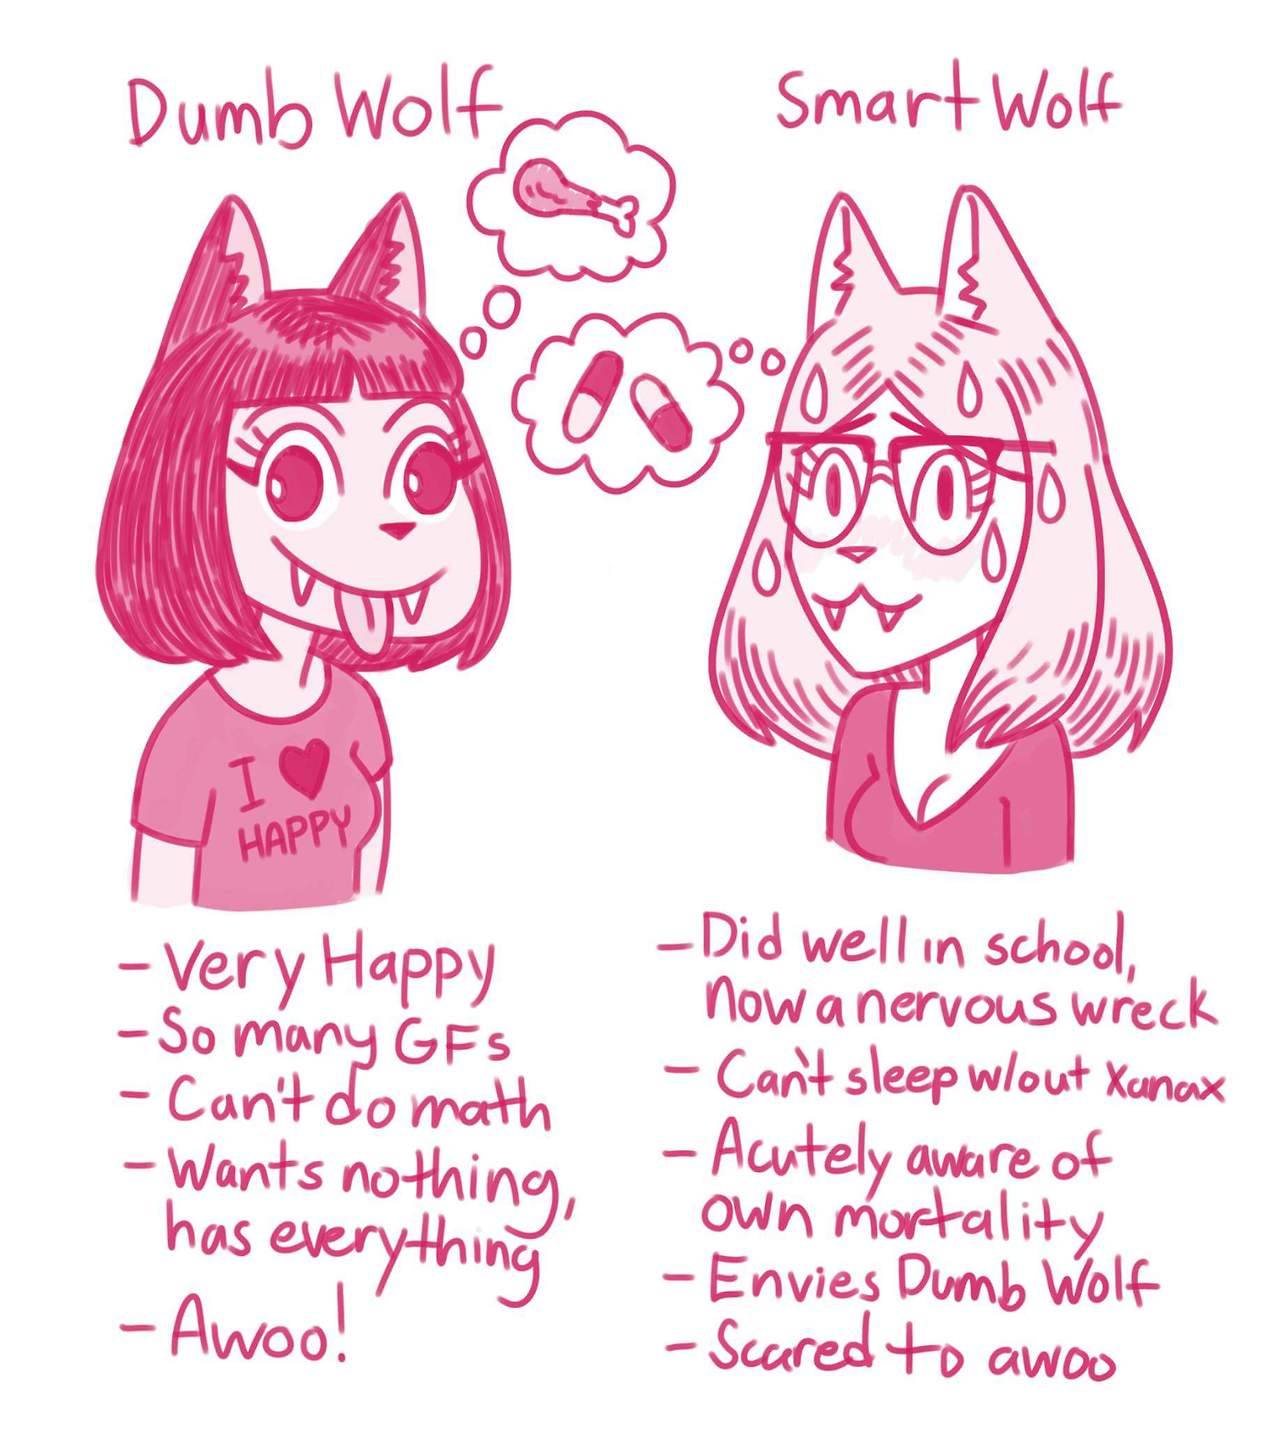 Which are you? I am probably smart wolf, but I wish I was dumb wolf.If you know